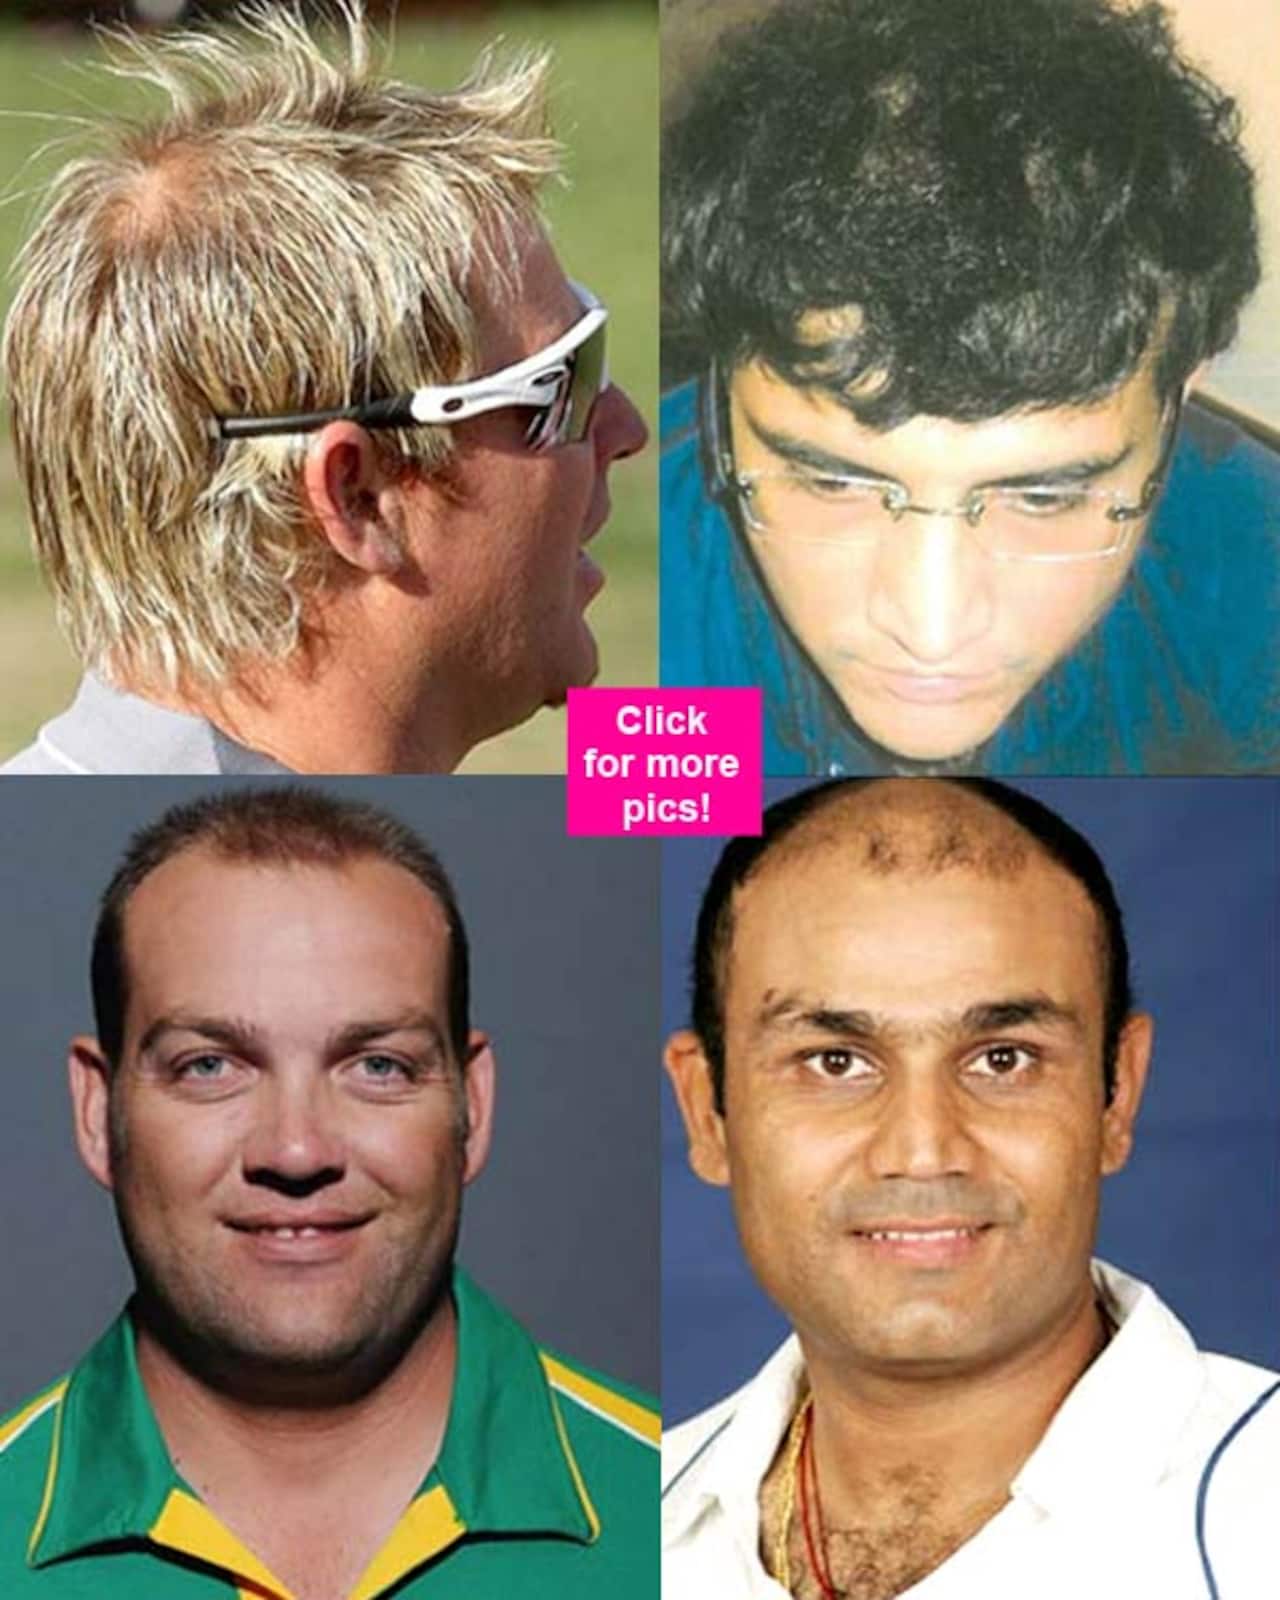 Sourav Ganguly, Jacques Kallis, Virender Sehwag, Doug Bollinger- 10  cricketers who went for hair transplant - Bollywood News & Gossip, Movie  Reviews, Trailers & Videos at 